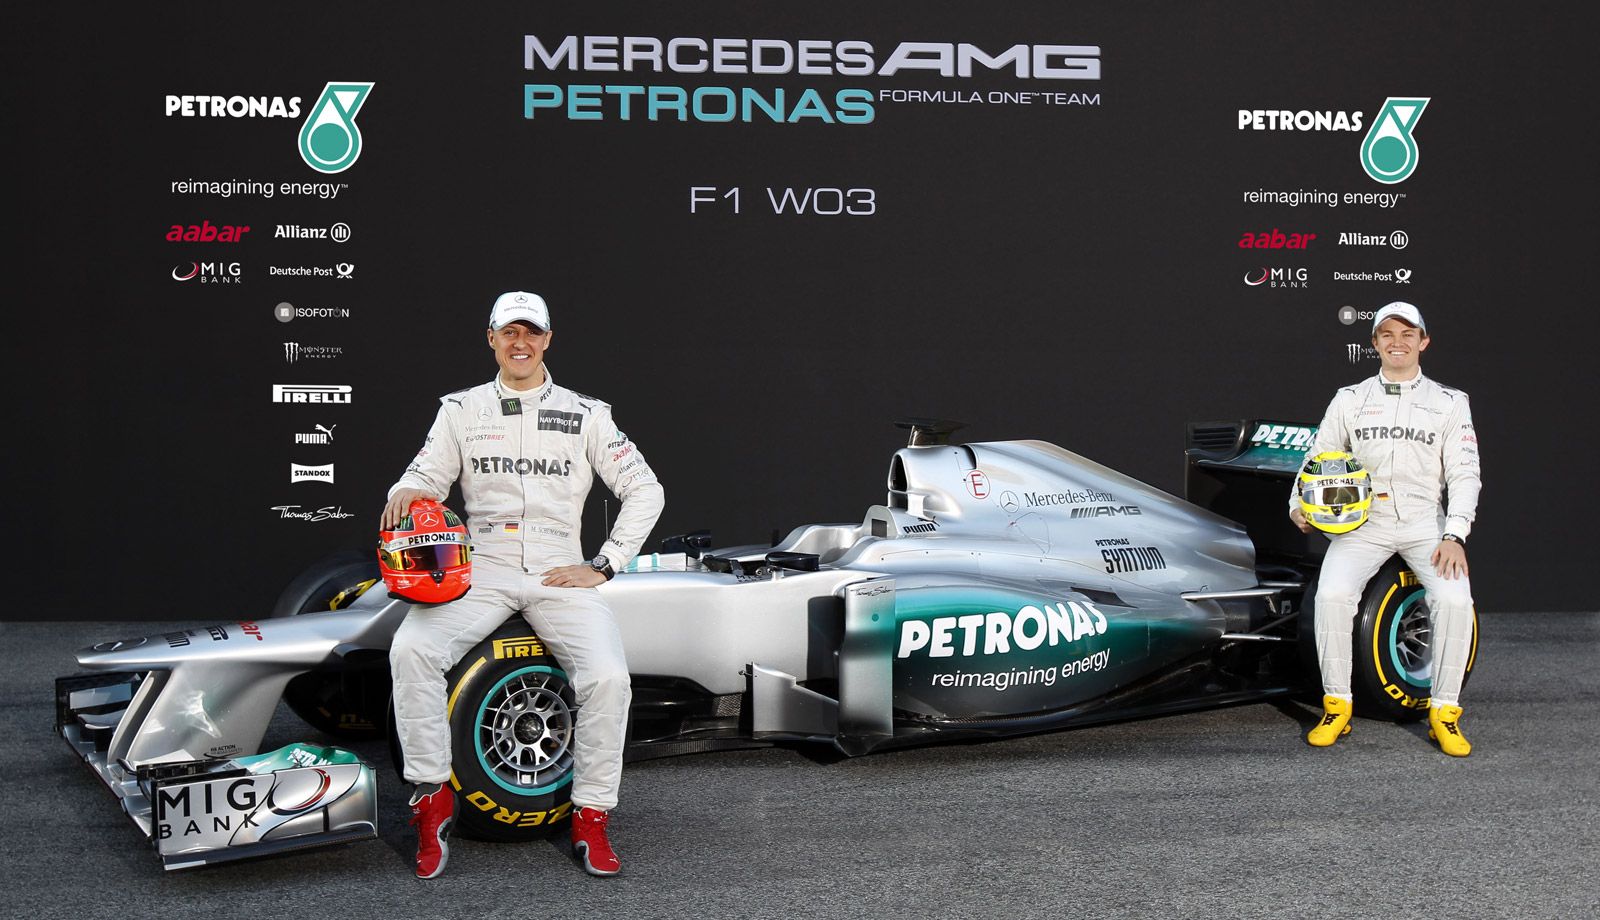 michael-schumacher-and-nico-rosberg-with-the-2012-mercedes-amg-petronas-w03_100382971_h